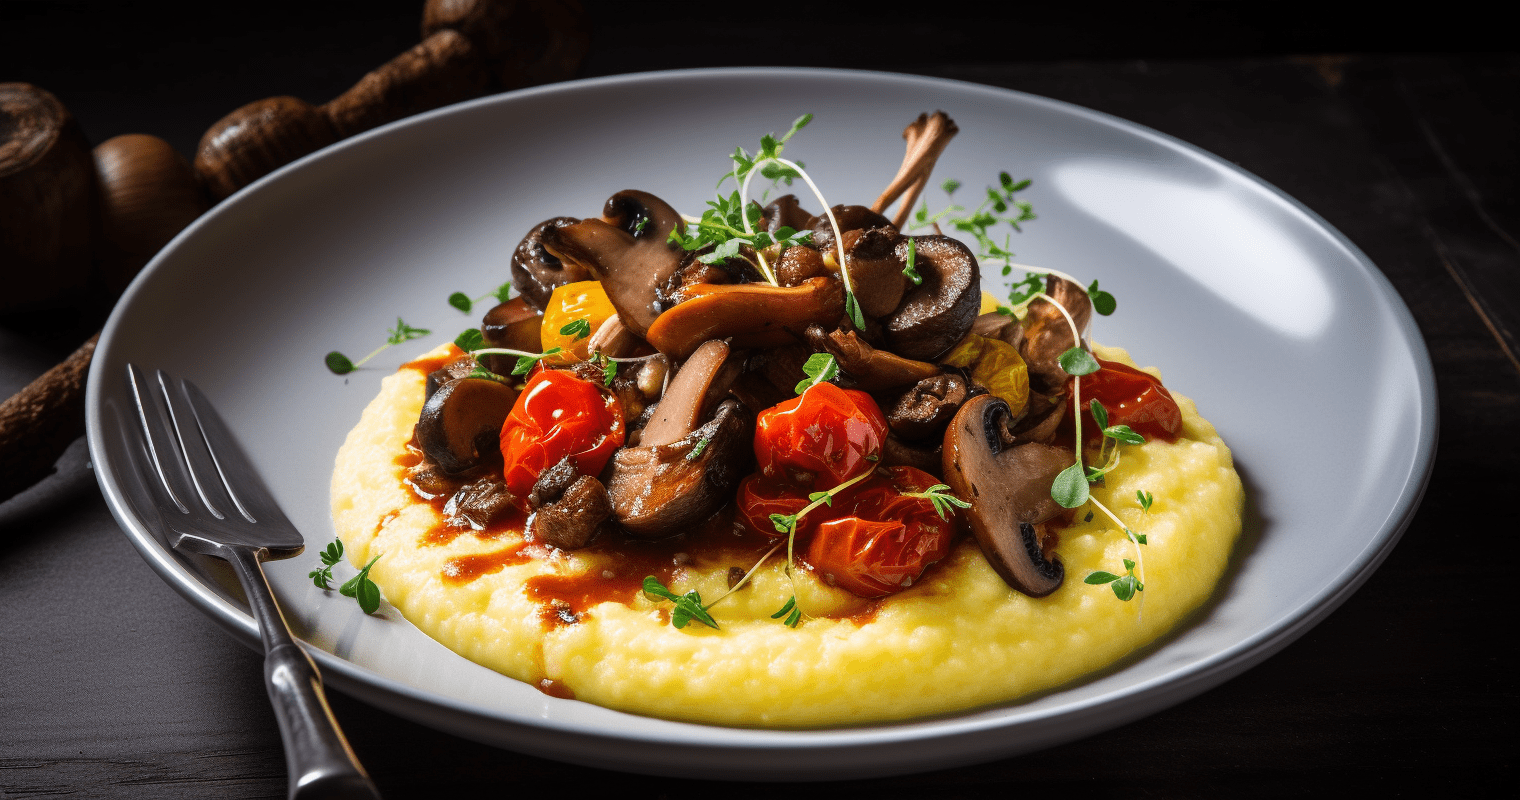 Sichuan Roasted Mushroom and Tomato with Polenta Final Dish